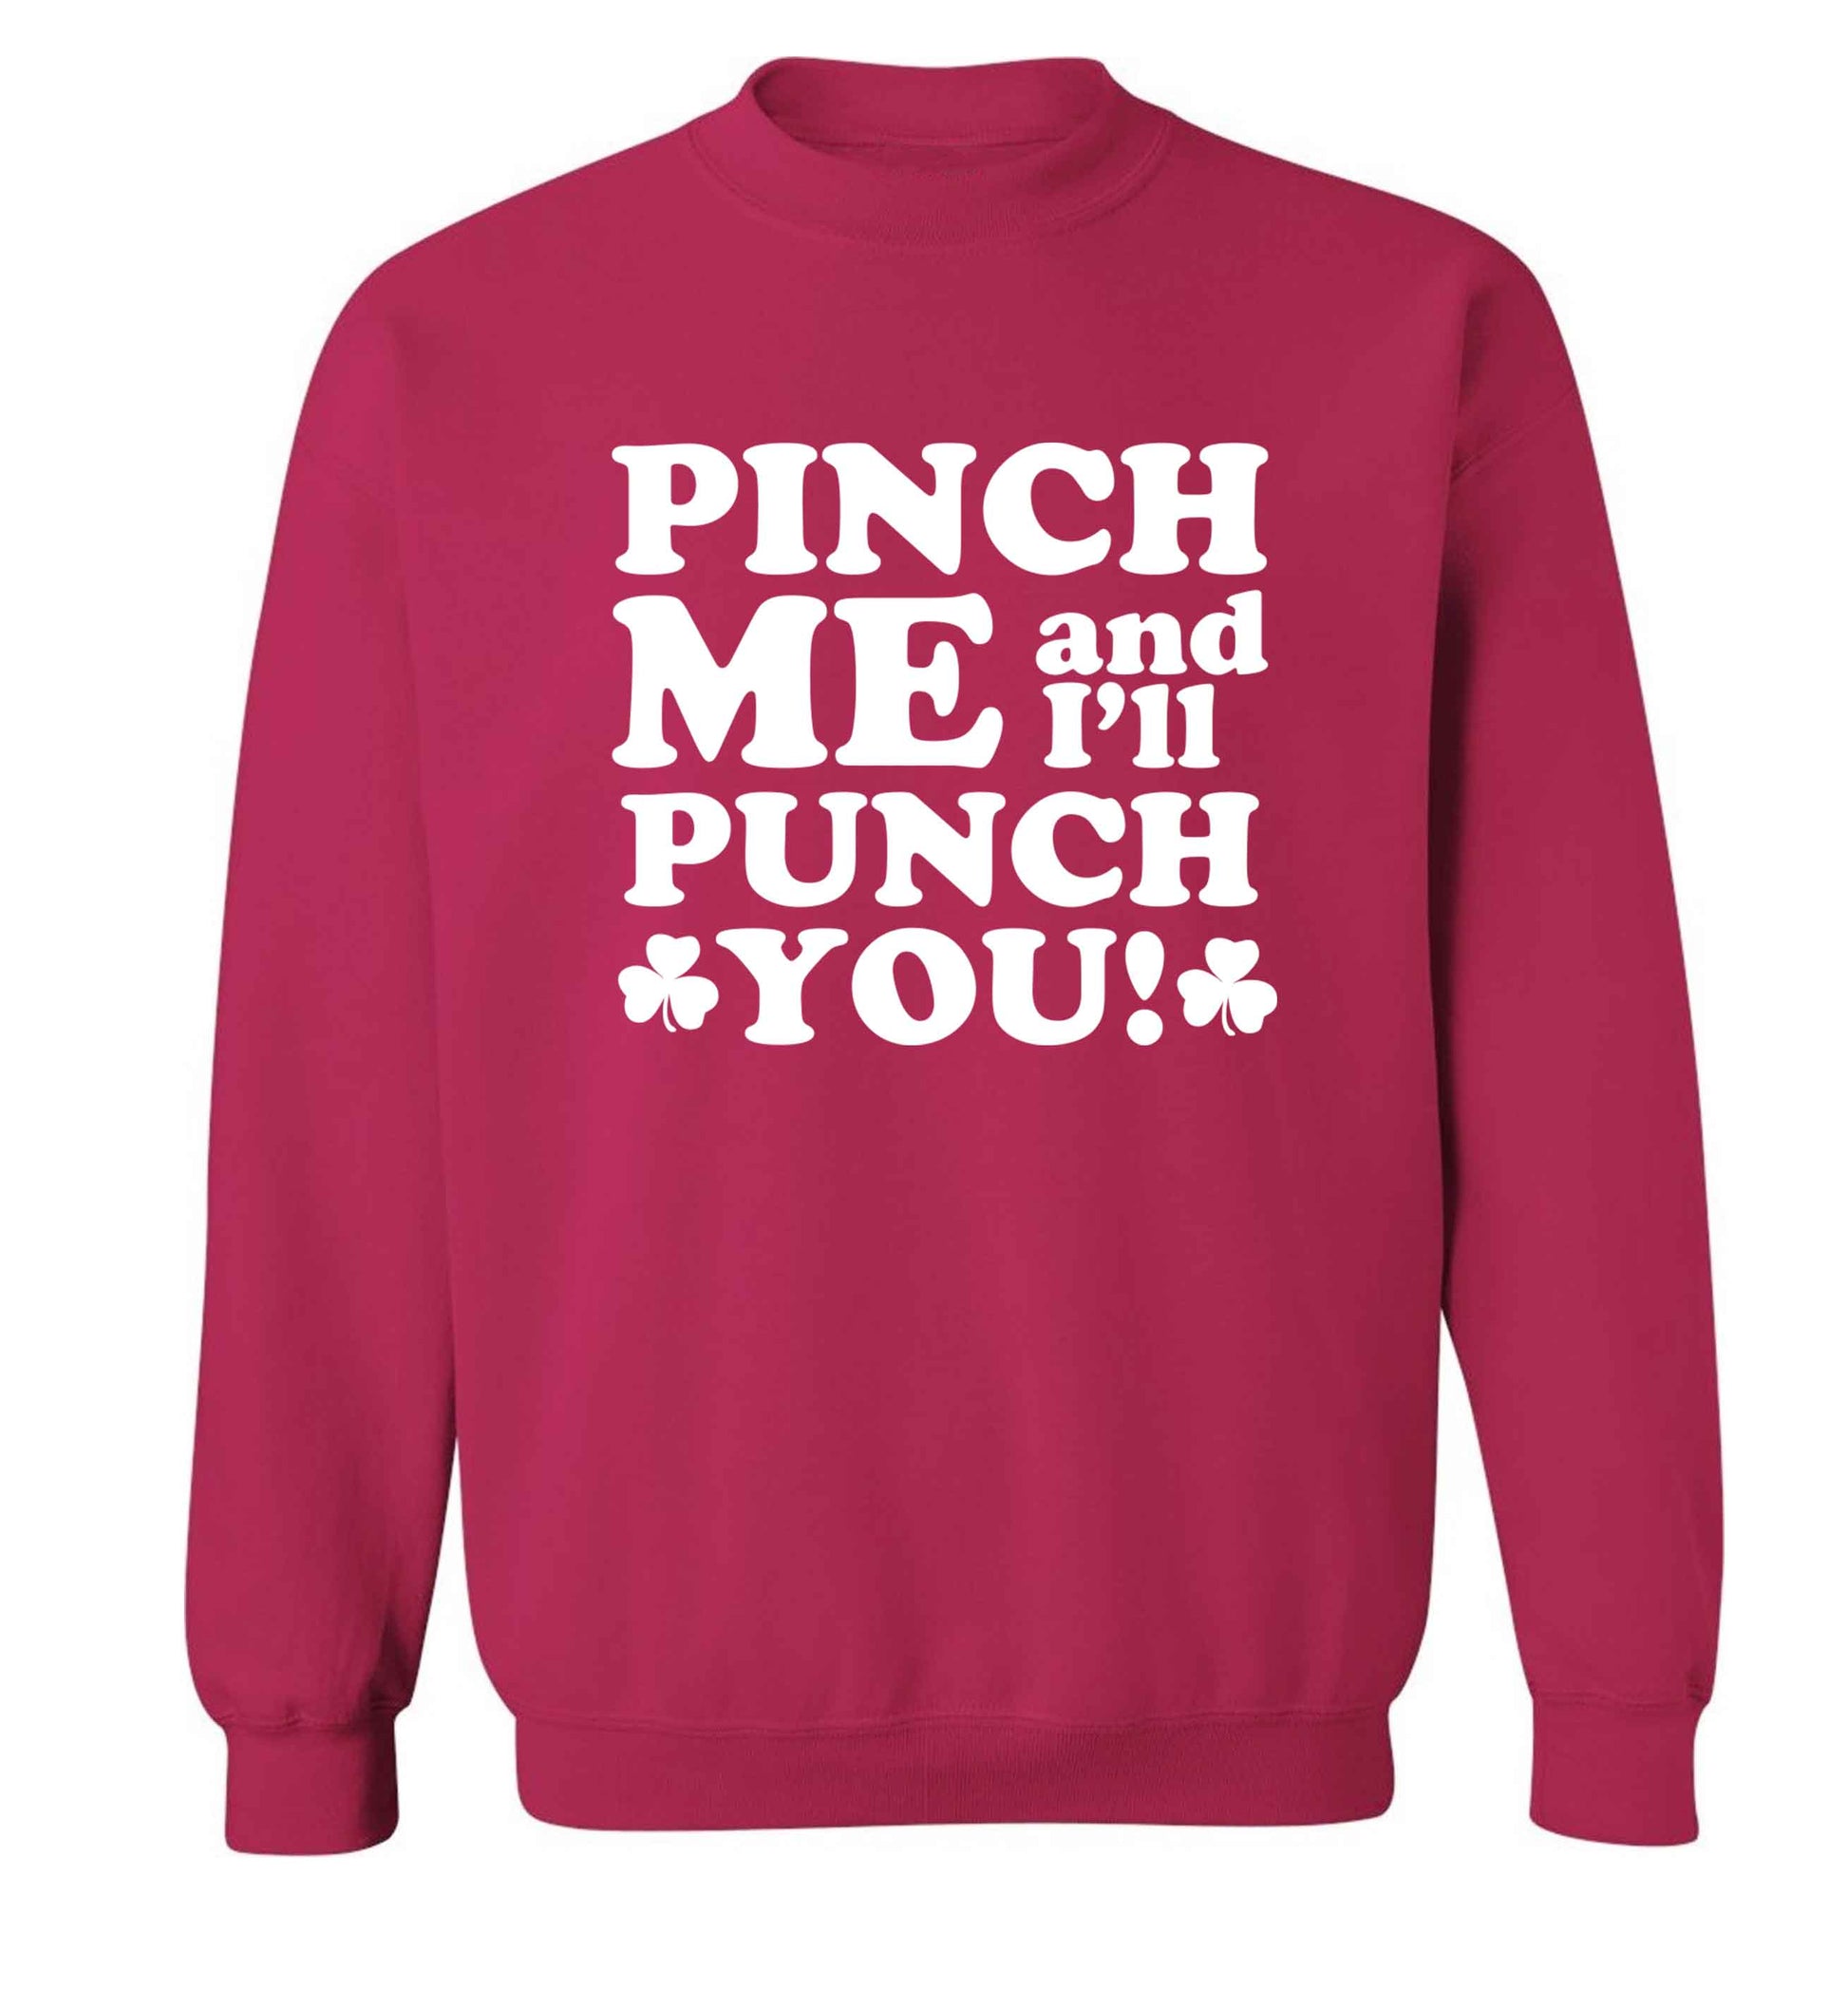 Pinch me and I'll punch you adult's unisex pink sweater 2XL